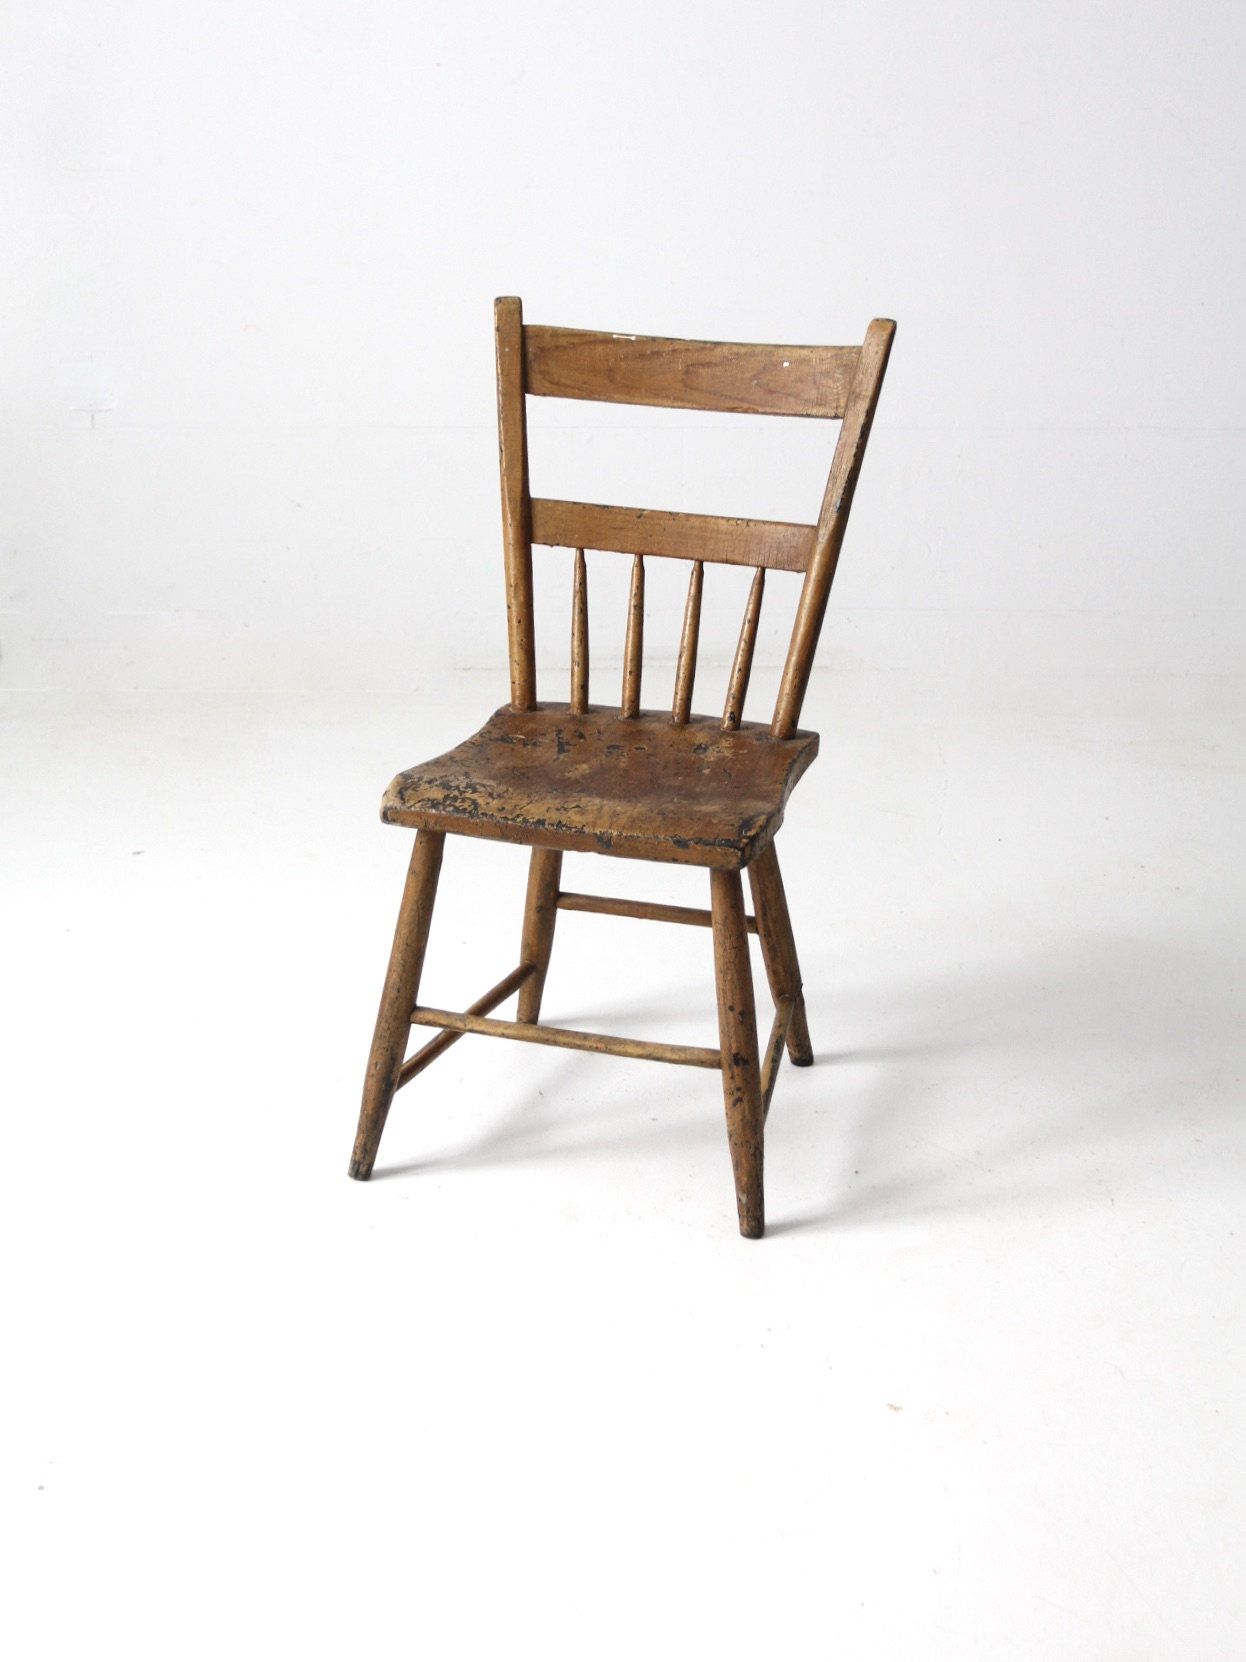 The Timeless Charm of Antique Wooden Chairs